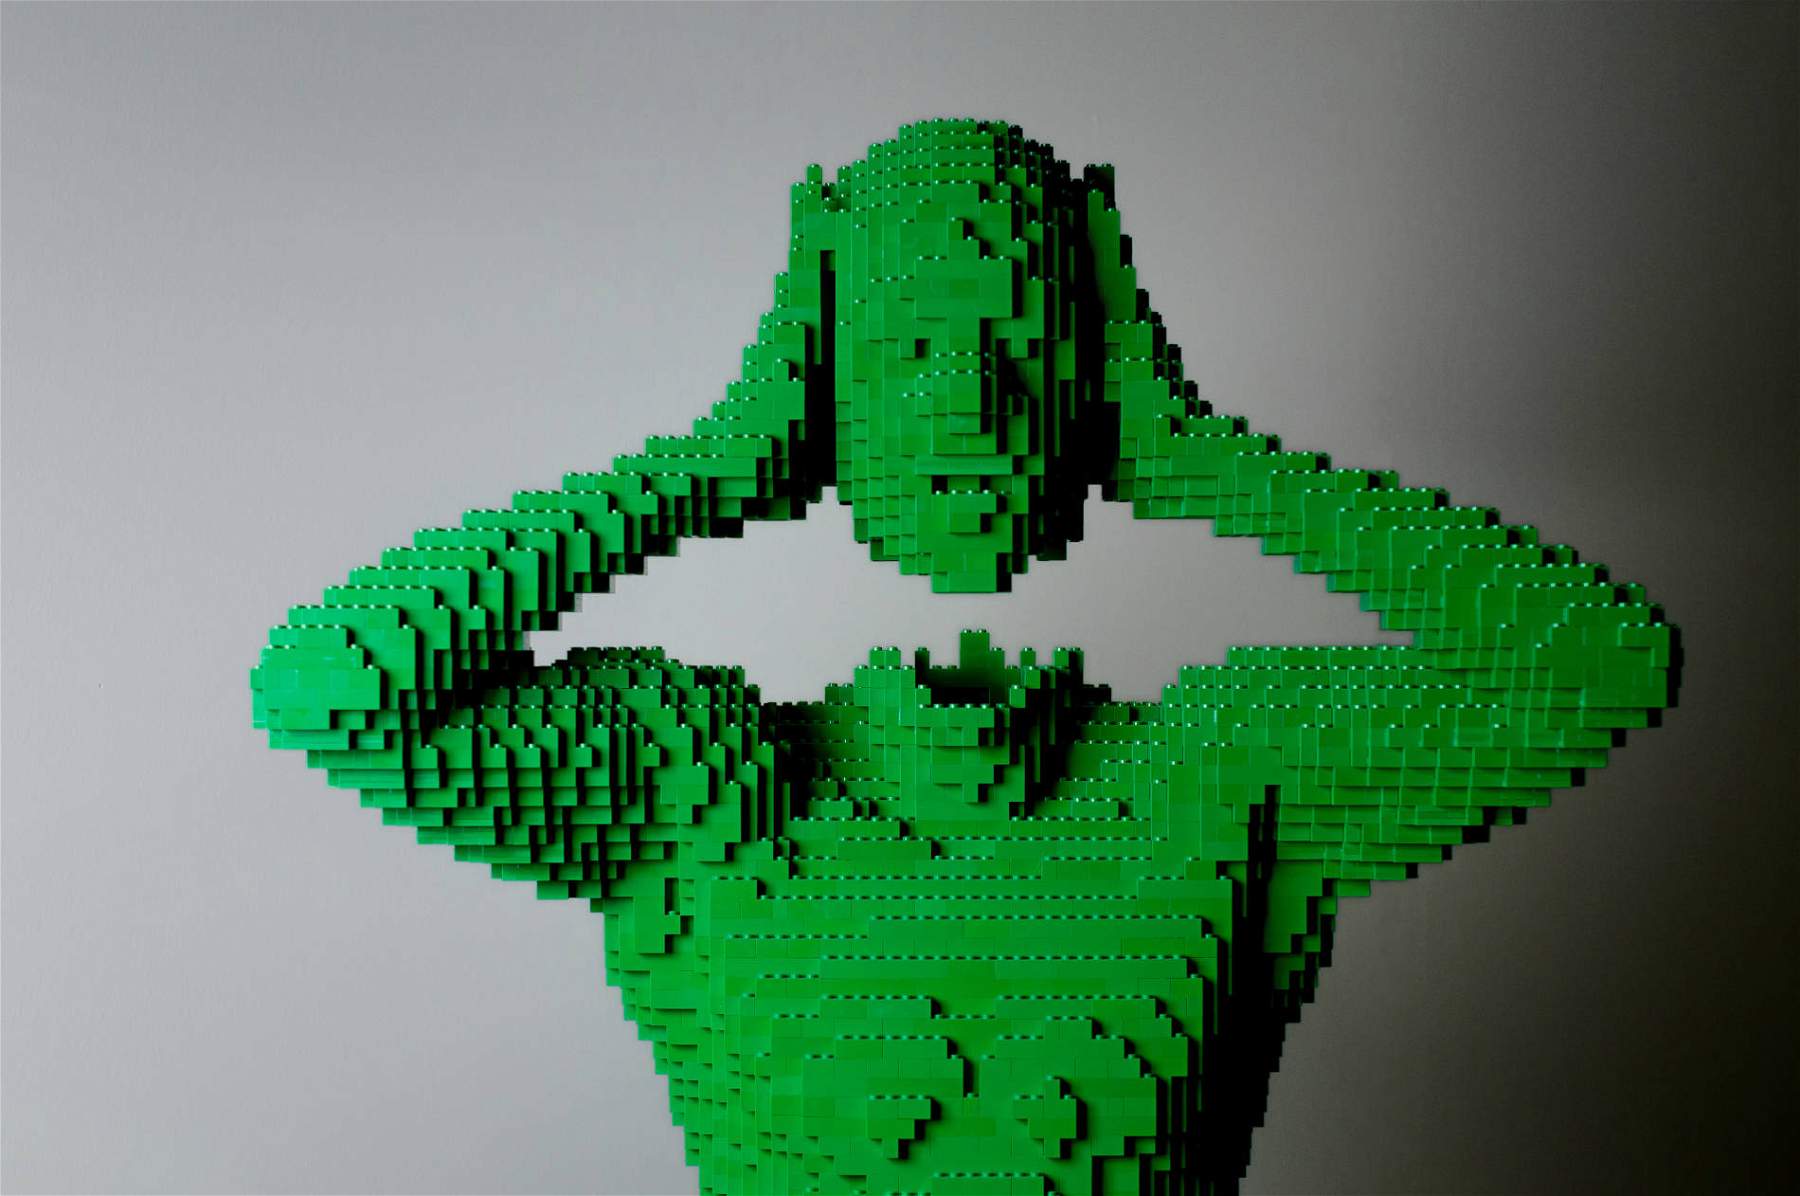 The Art of the Brick, the world's most famous traveling Lego exhibition, arrives in Milan